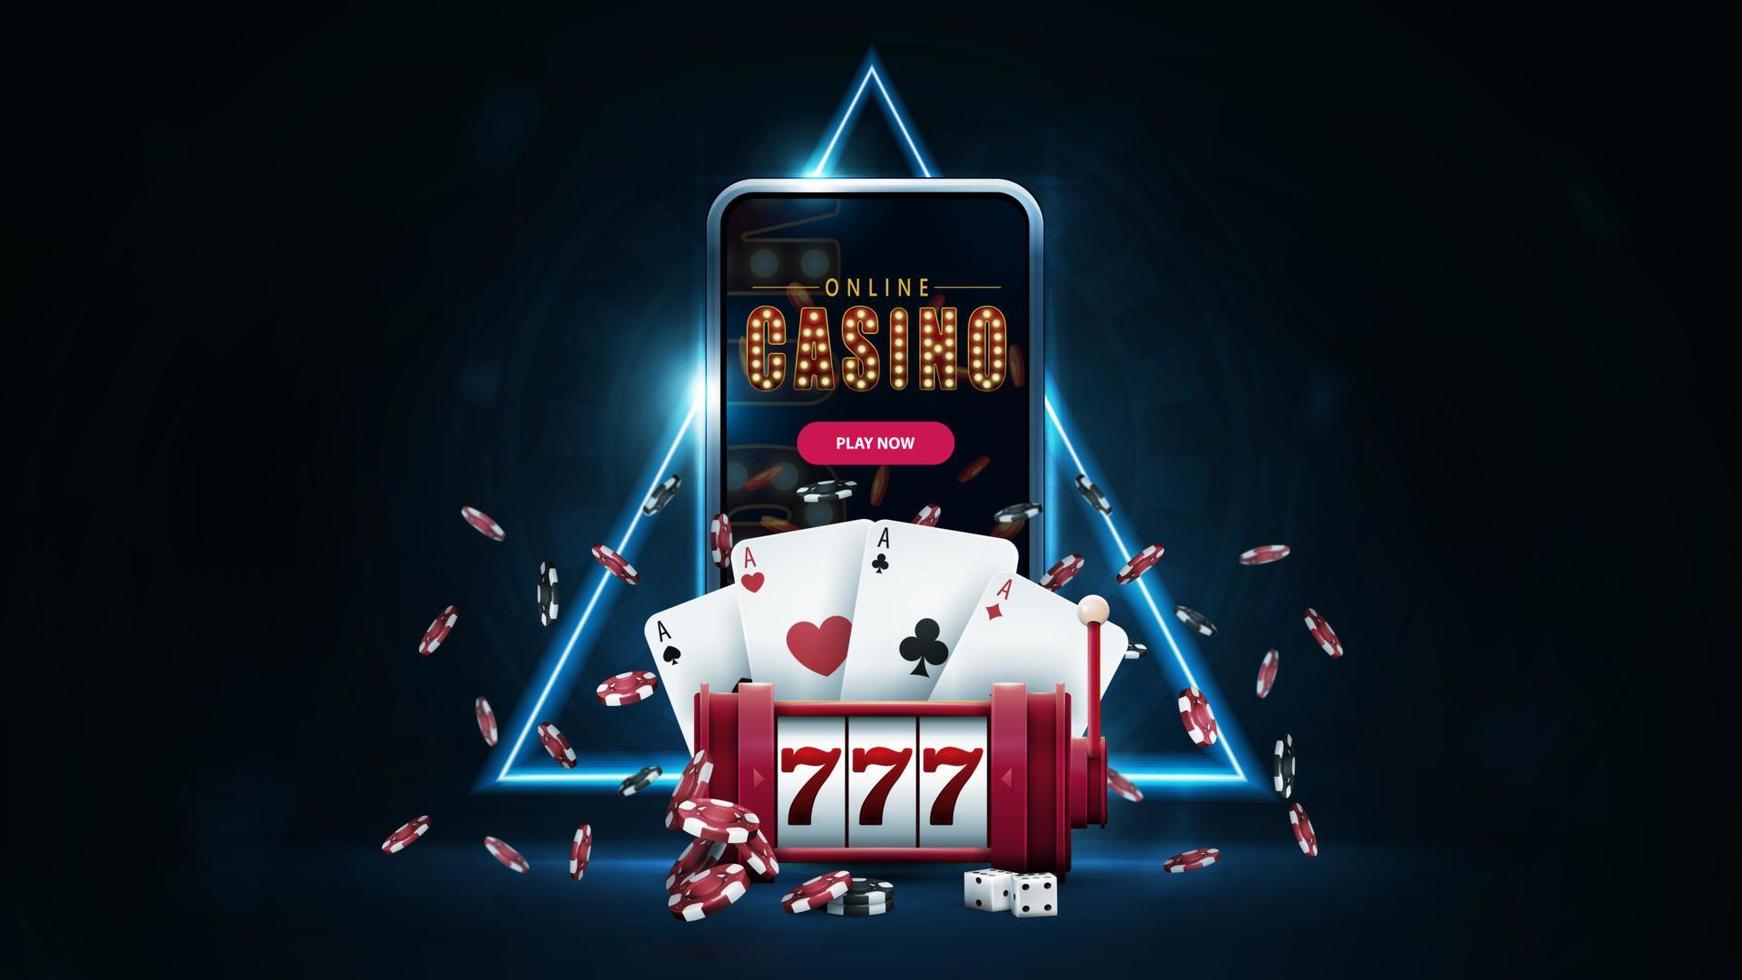 Online casino, banner with smartphone, red slot machine, poker chips, playing cards in dark scene with blue neon triangle border on background vector